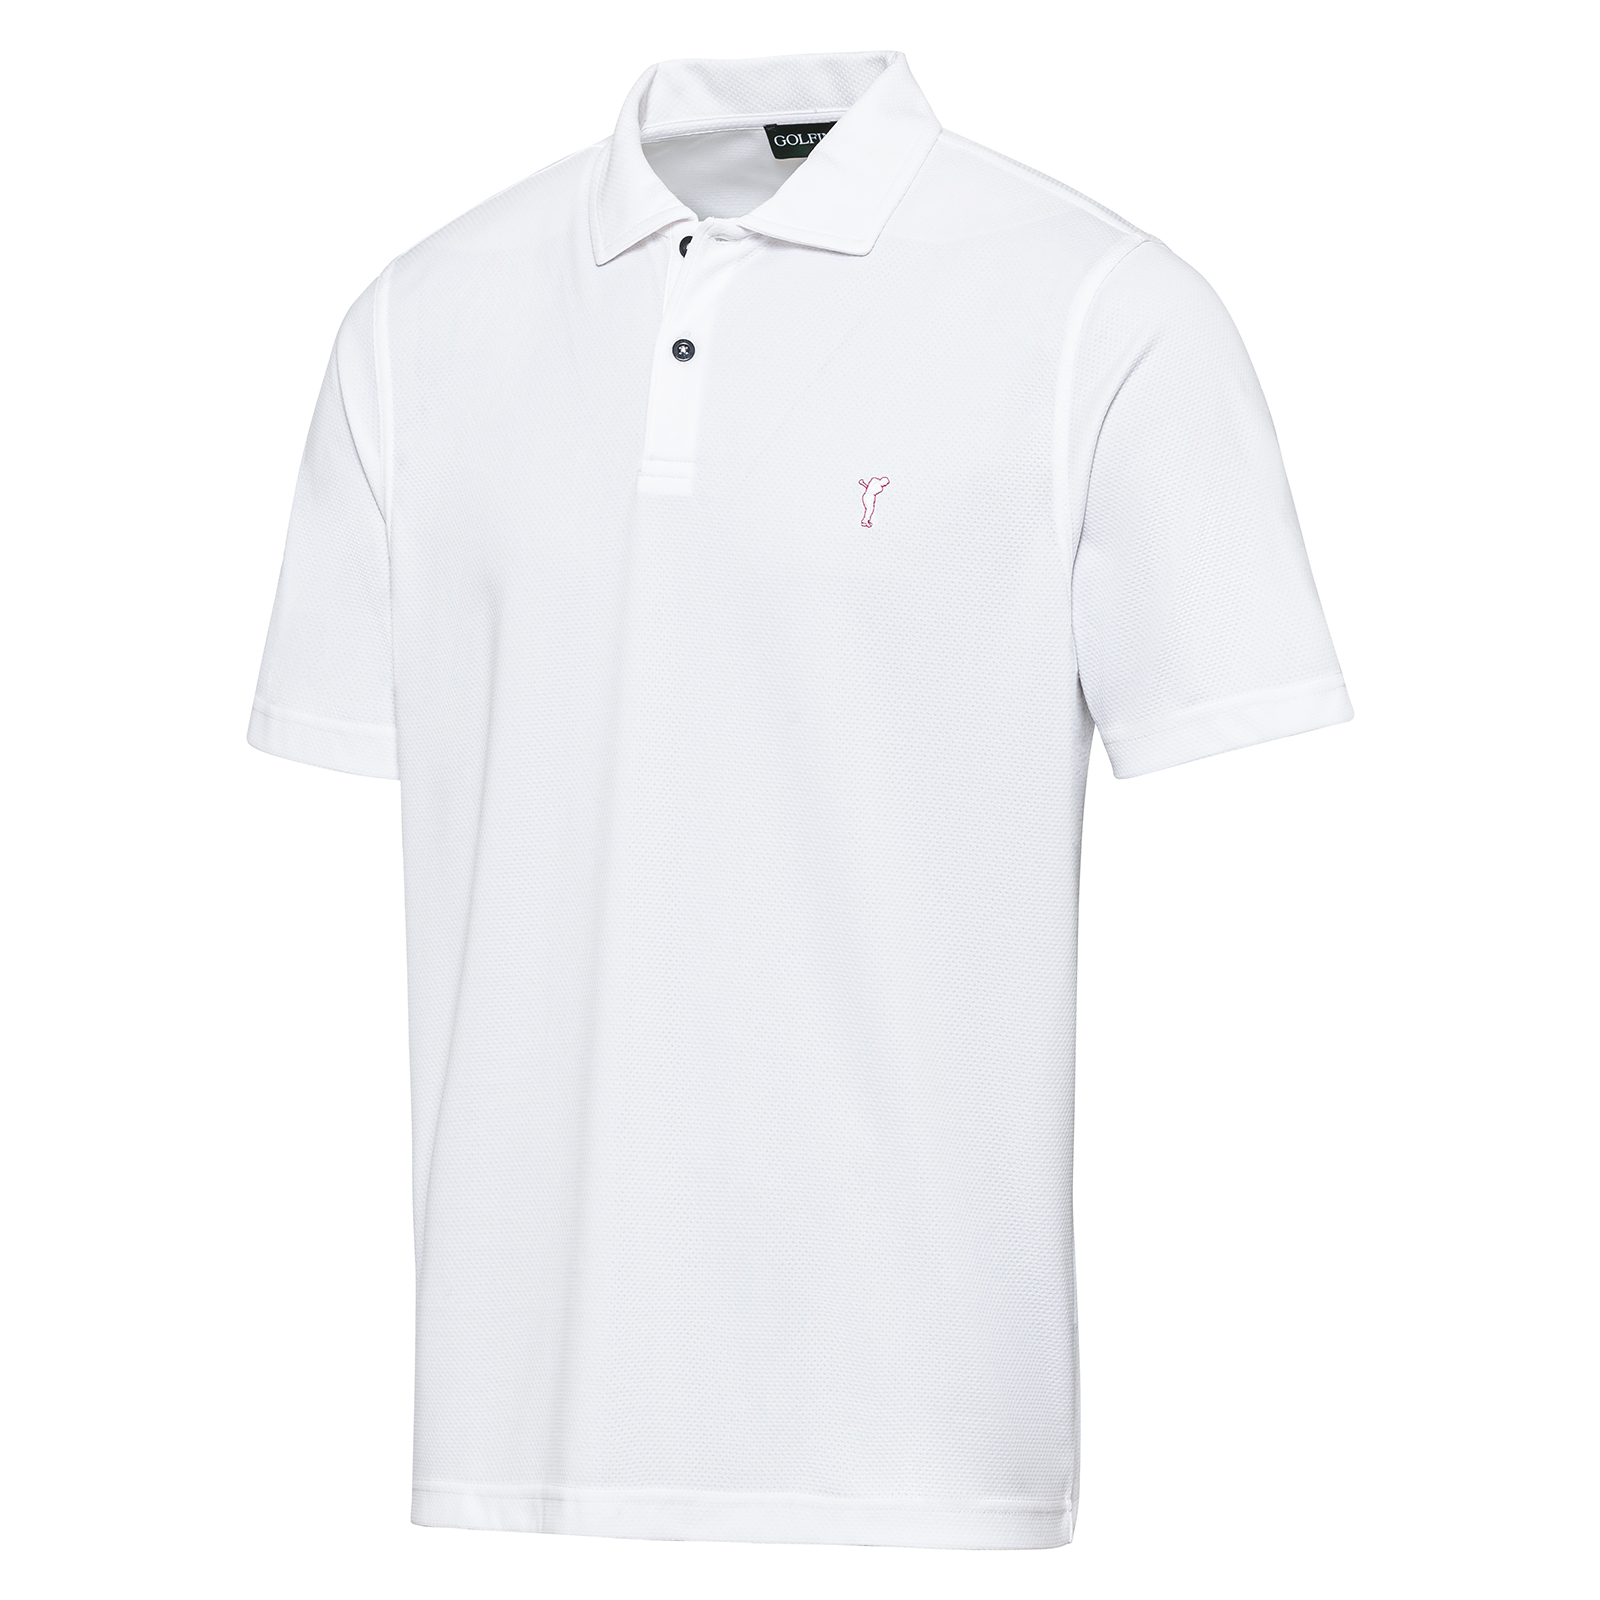 Men's golf shirt containing sustainable Kafetex® functional fibre